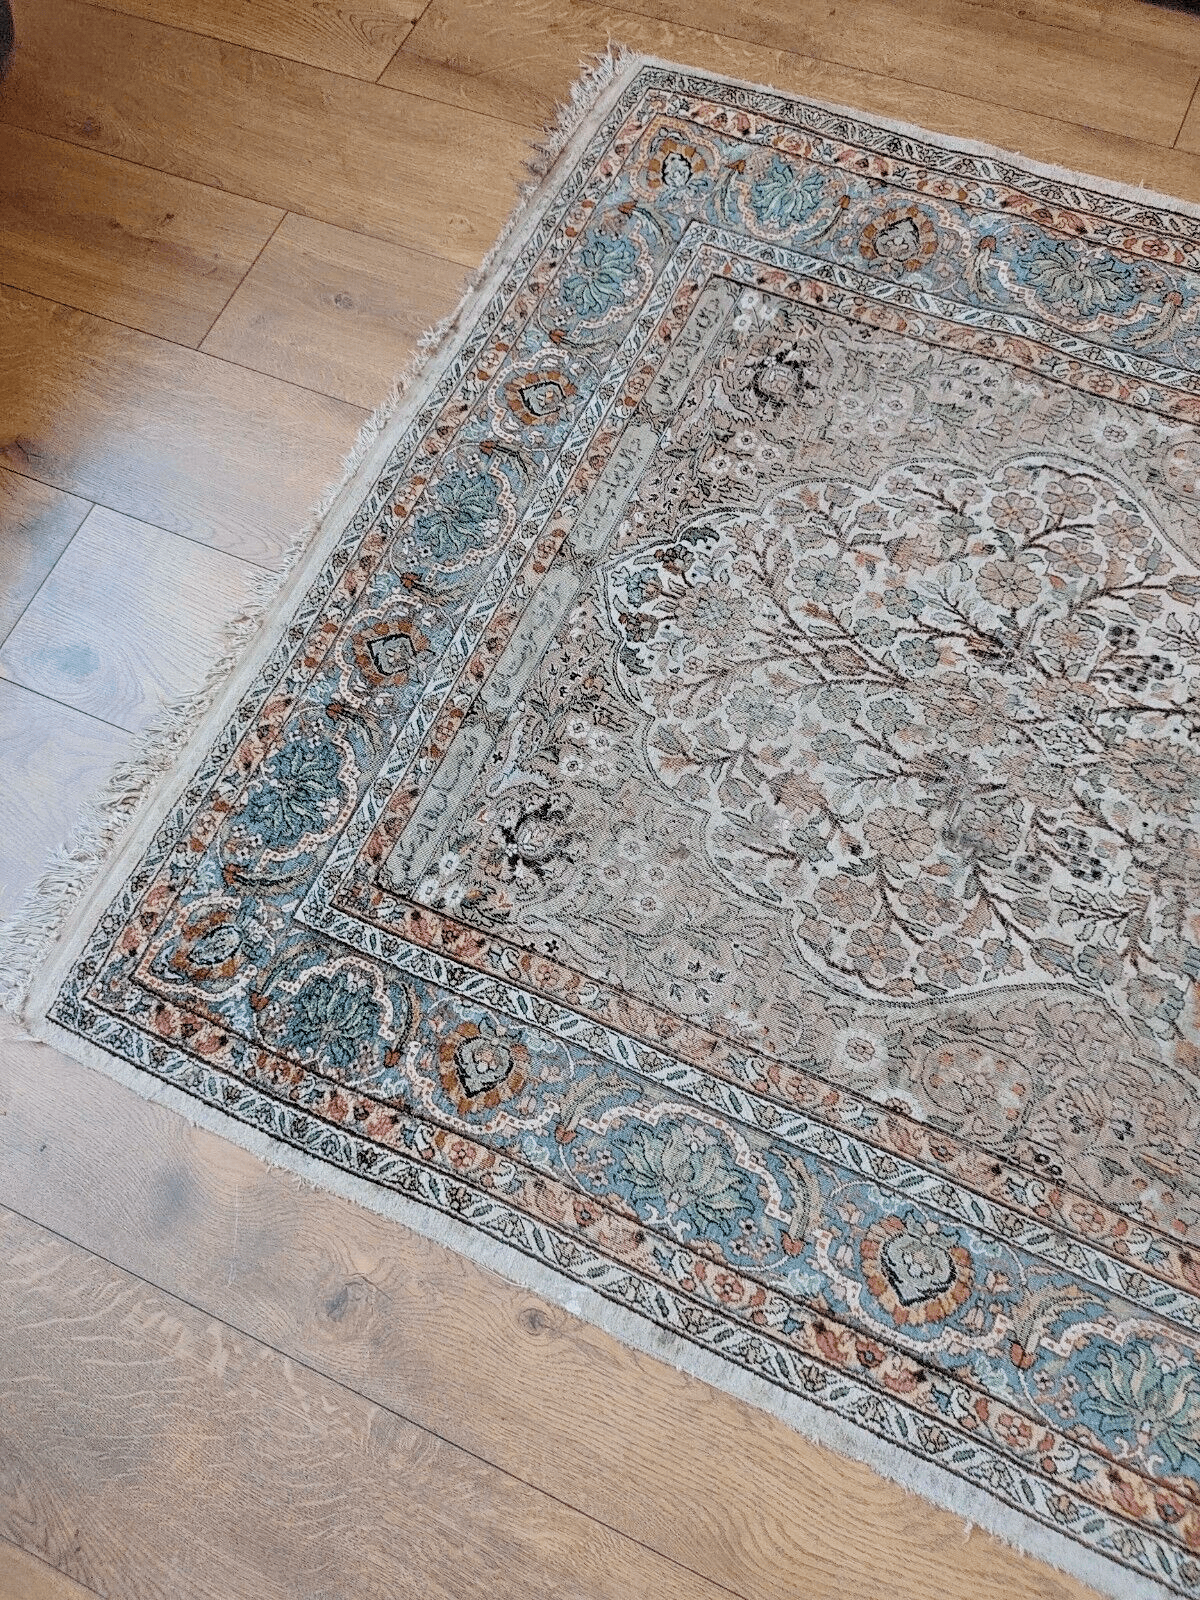 Antique Traditional Handmade Persian Tree of Life Wool Rug Carpet - 190 X 119 cm - Tommy's Treasure